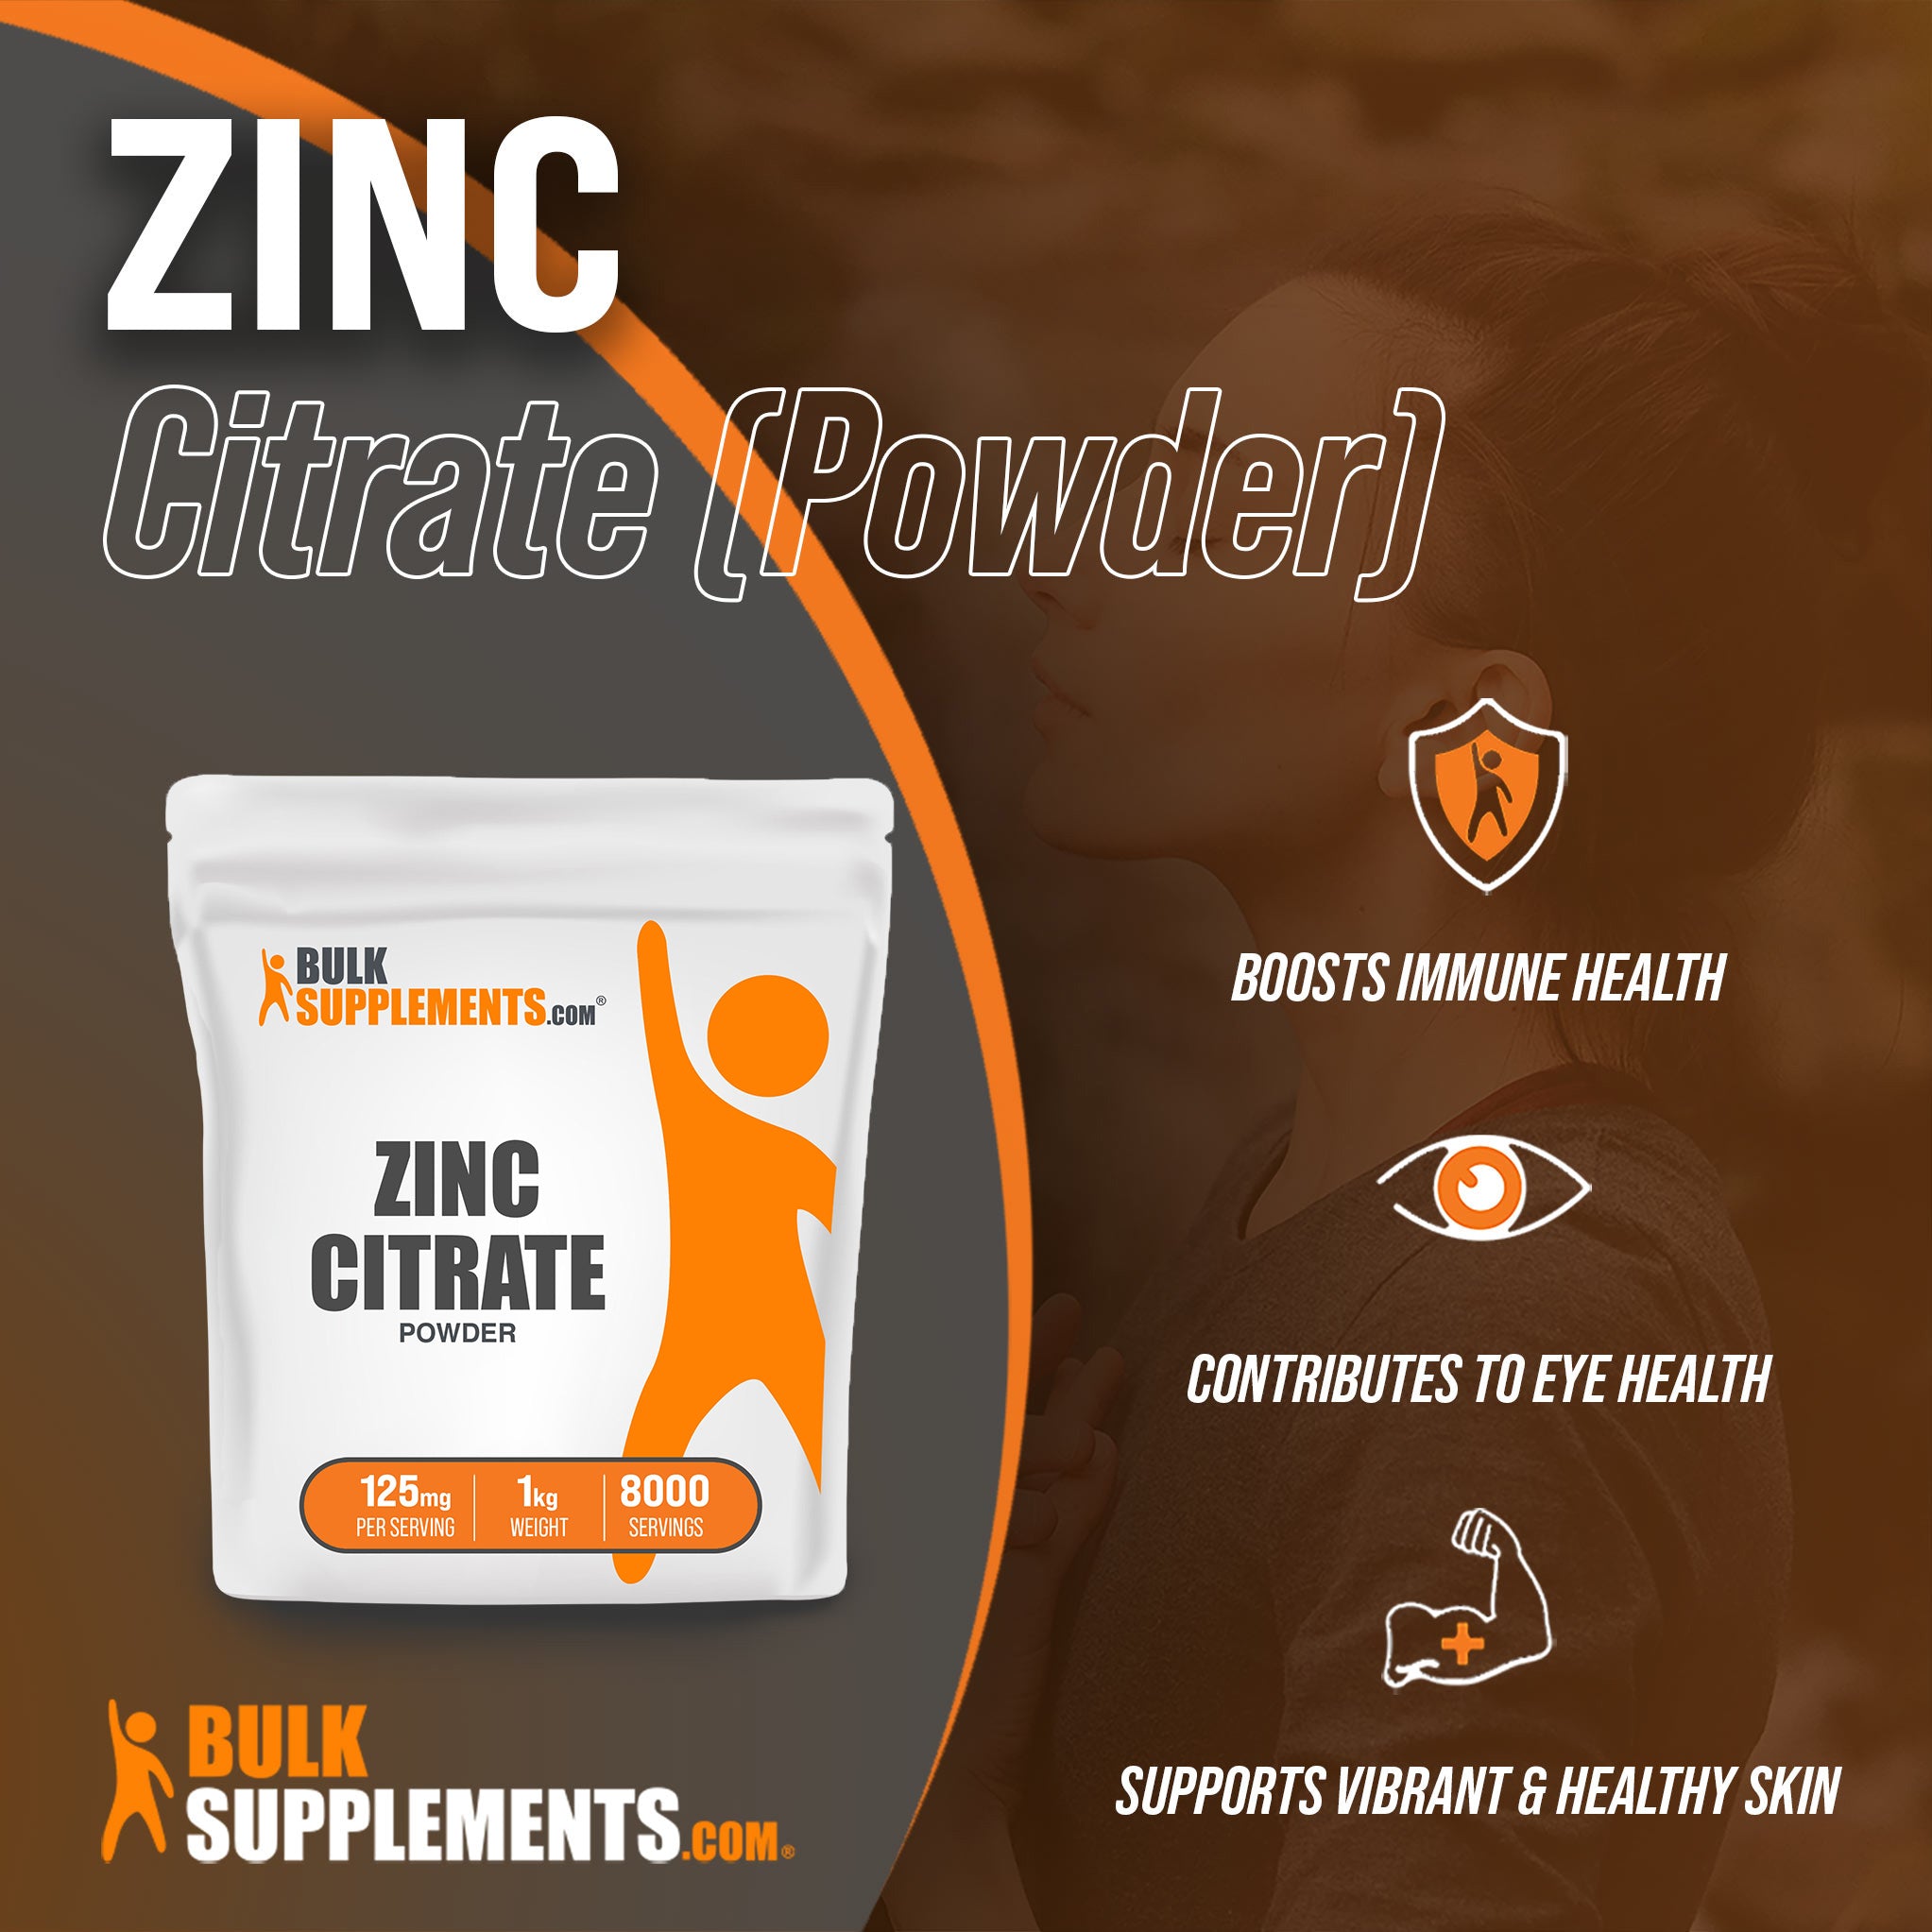 Benefits of Zinc Citrate Powder: boosts immune health, contributes to eye health, supports vibrant and healthy skin